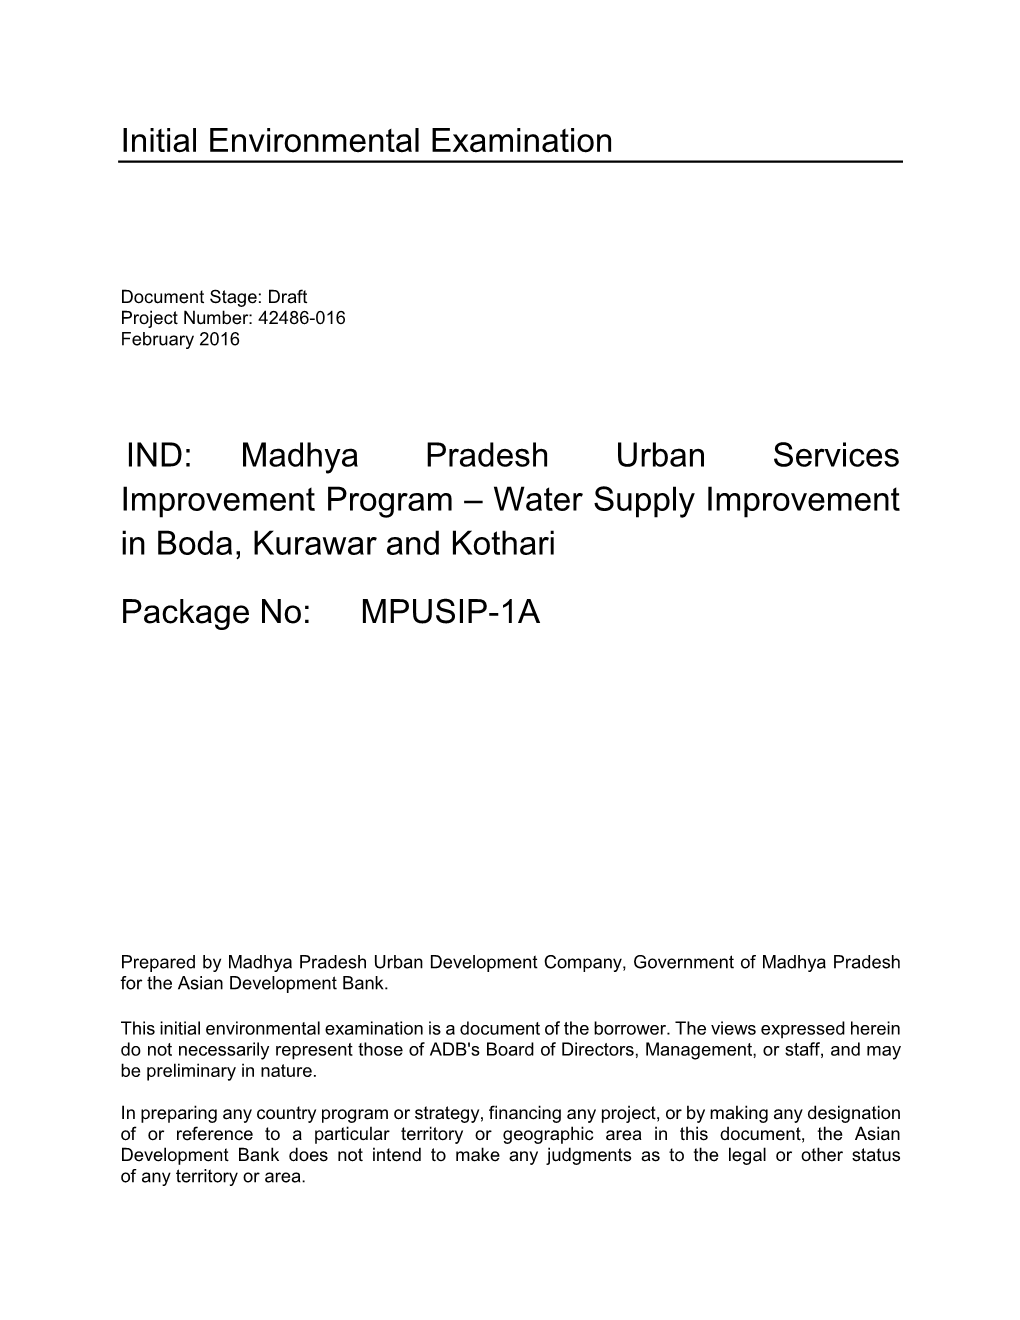 Madhya Pradesh Urban Services Improvement Project: Package 1A